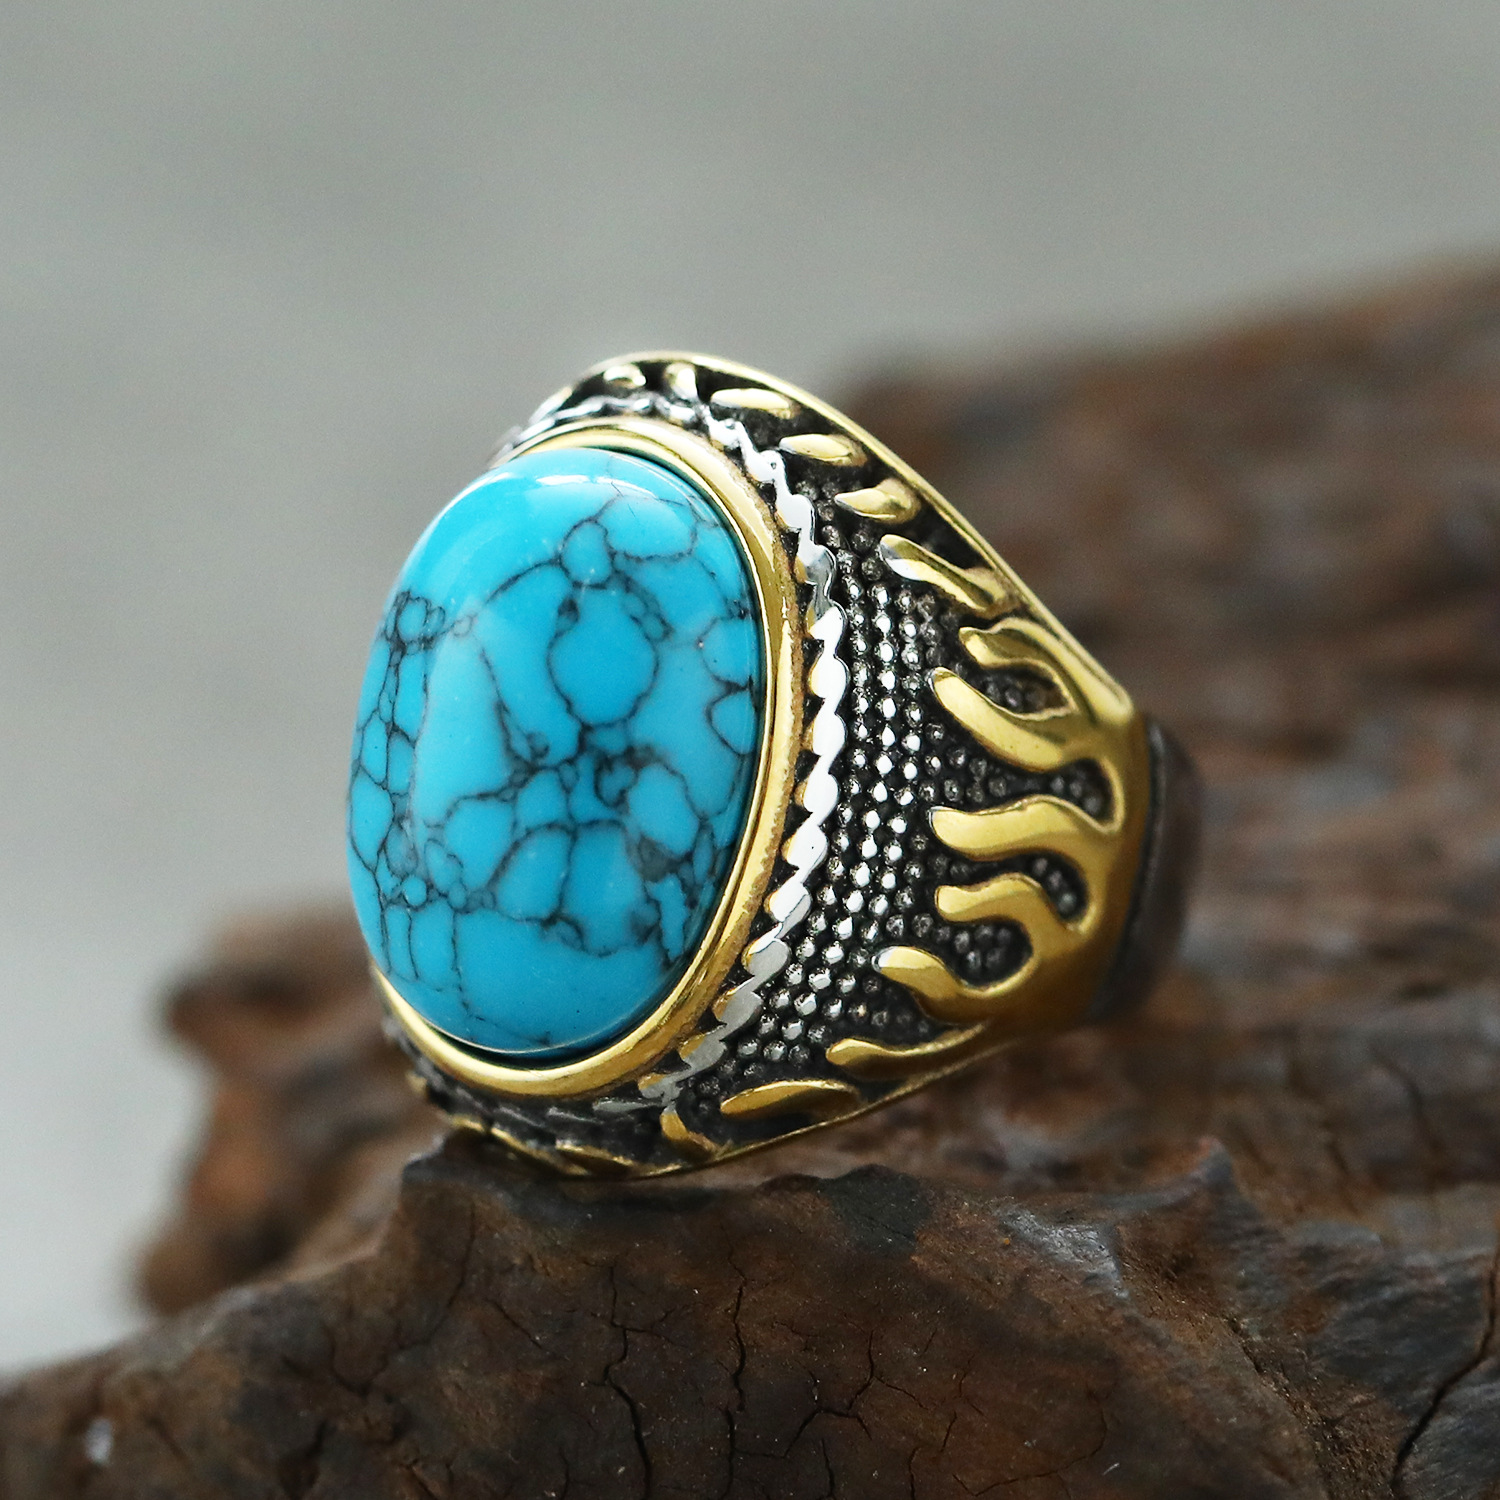 10:Steel and gold blue turquoise